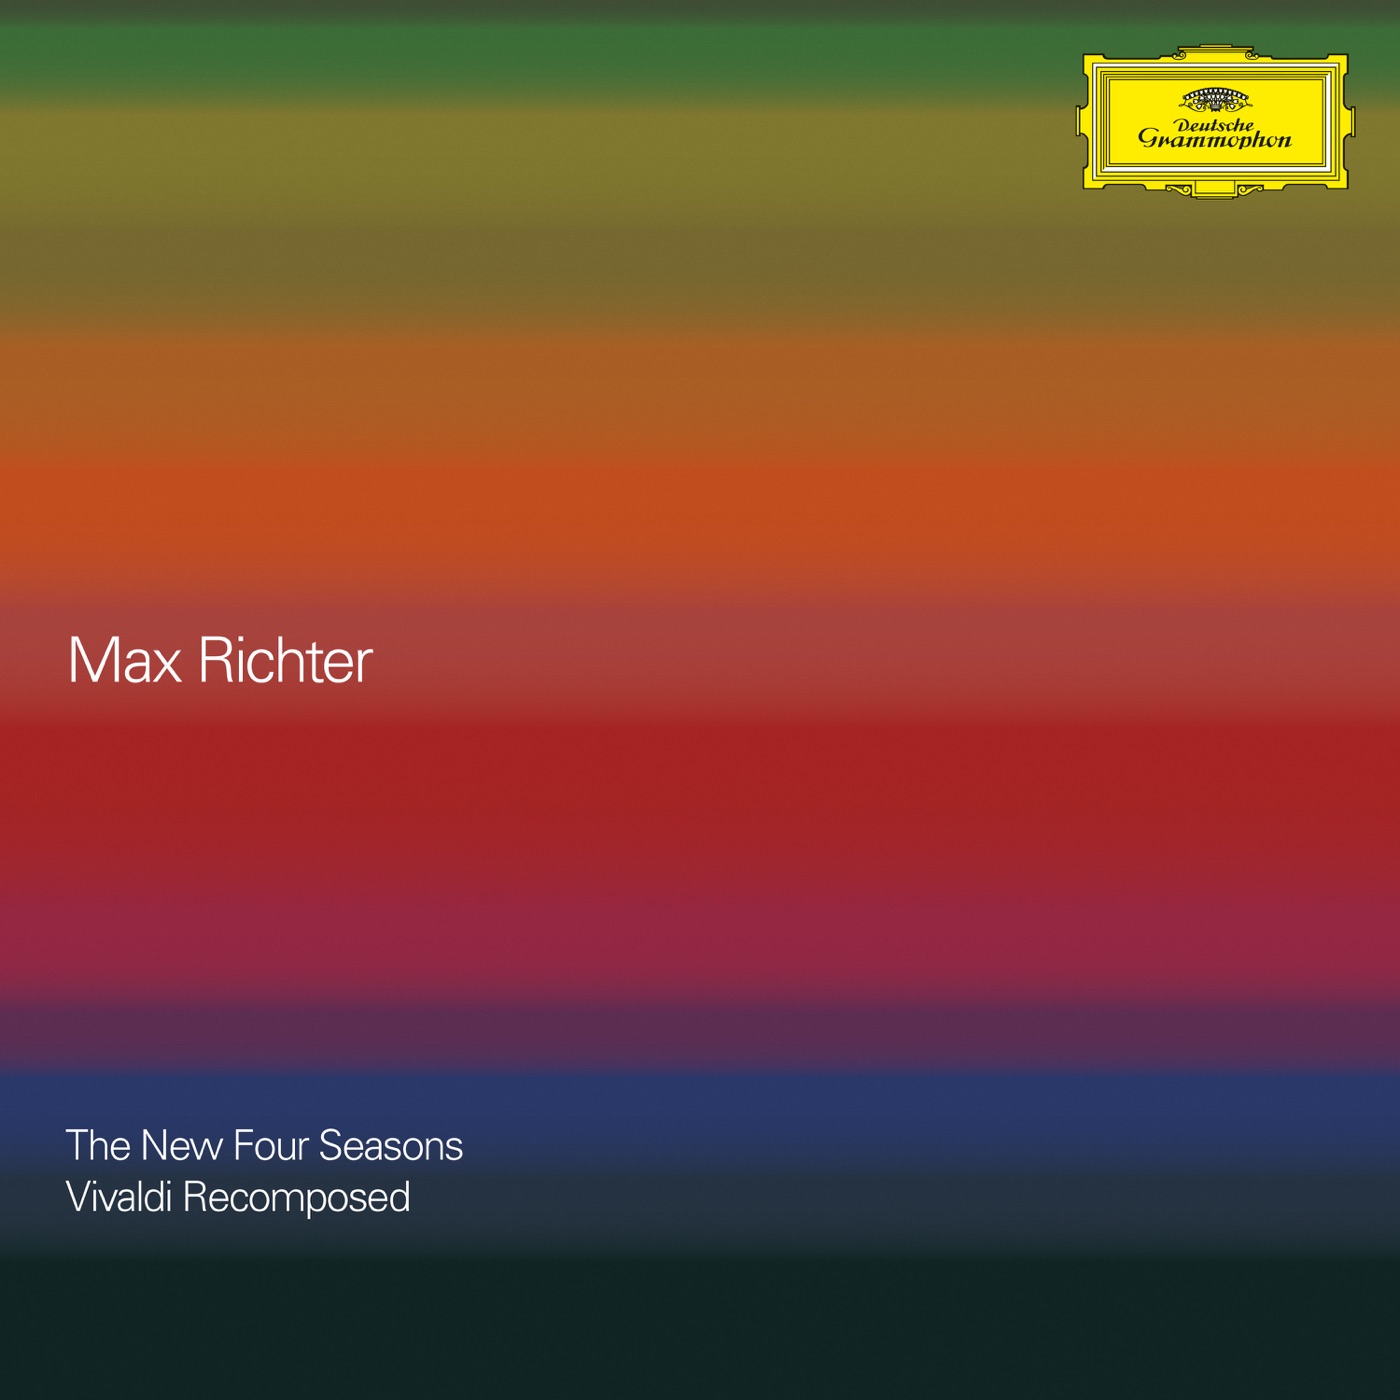 The New Four Seasons - Vivaldi Recomposed by Max Richter, Elena Urioste, Chineke! Orchestra